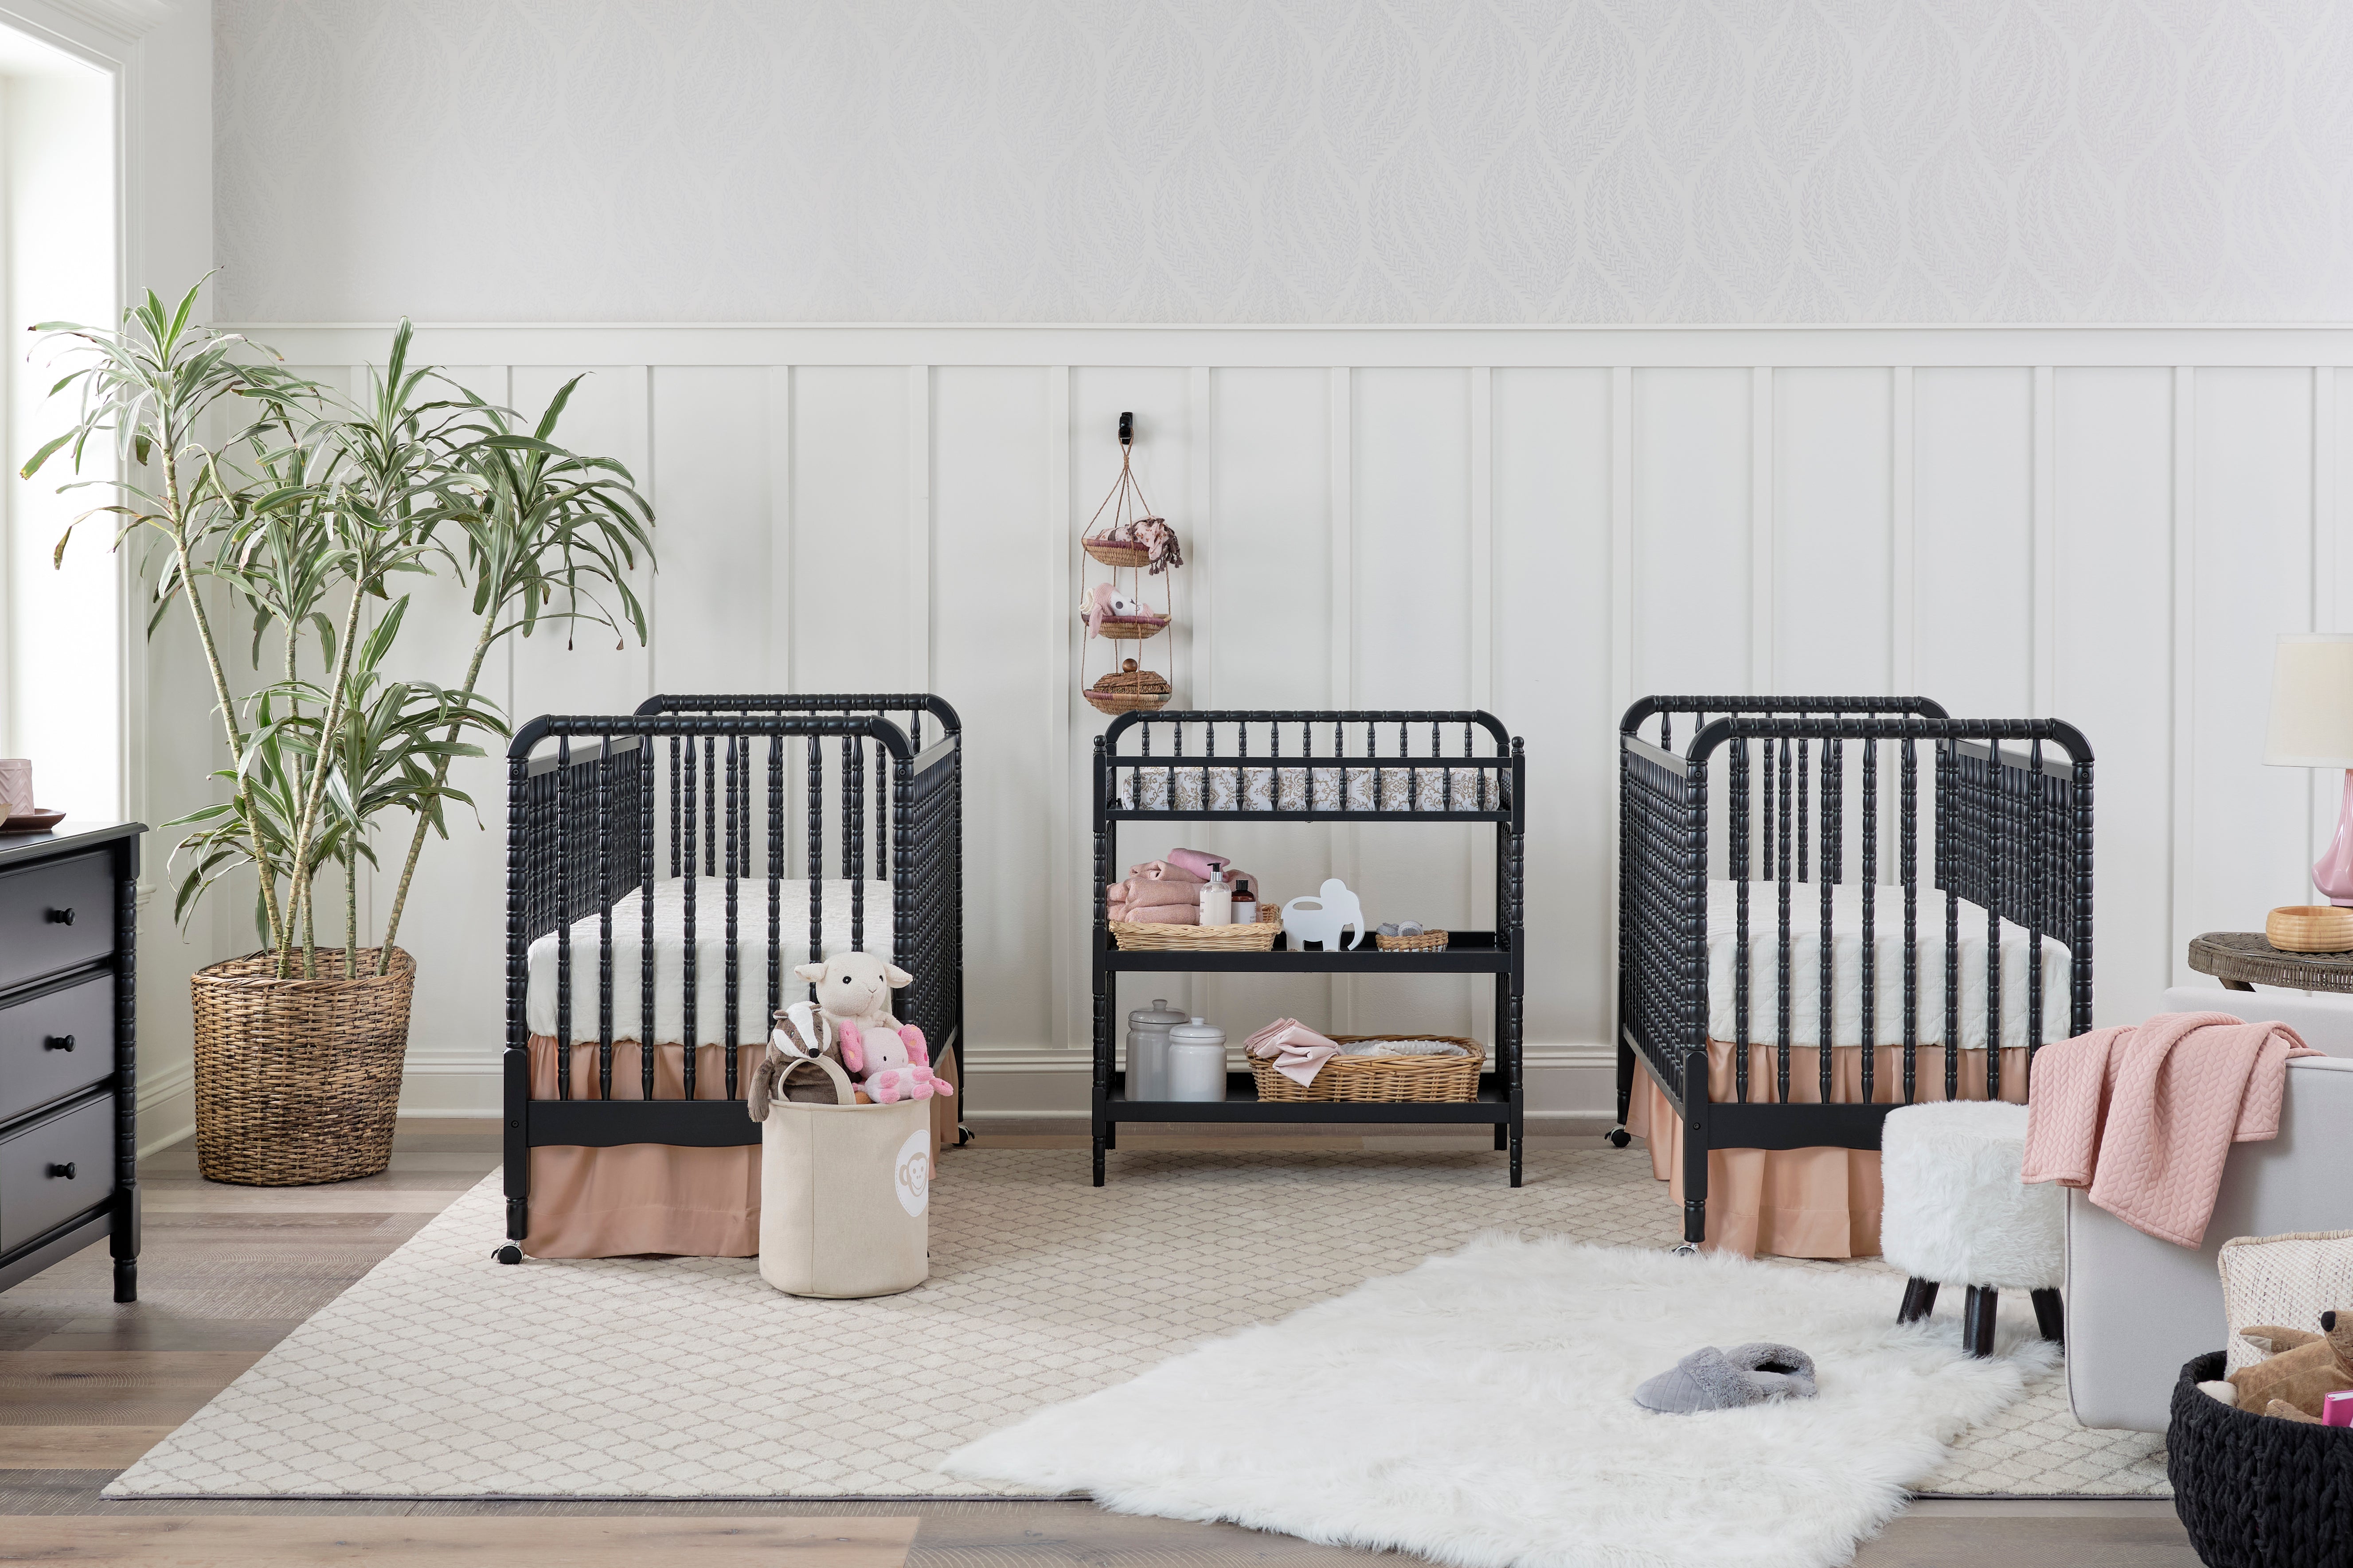 Twin Nursery featuring DaVinci Jenny Lind Cribs, Changing Table, and 6-Drawer Dresser in Ebony Finish set against elegant wainscoting 